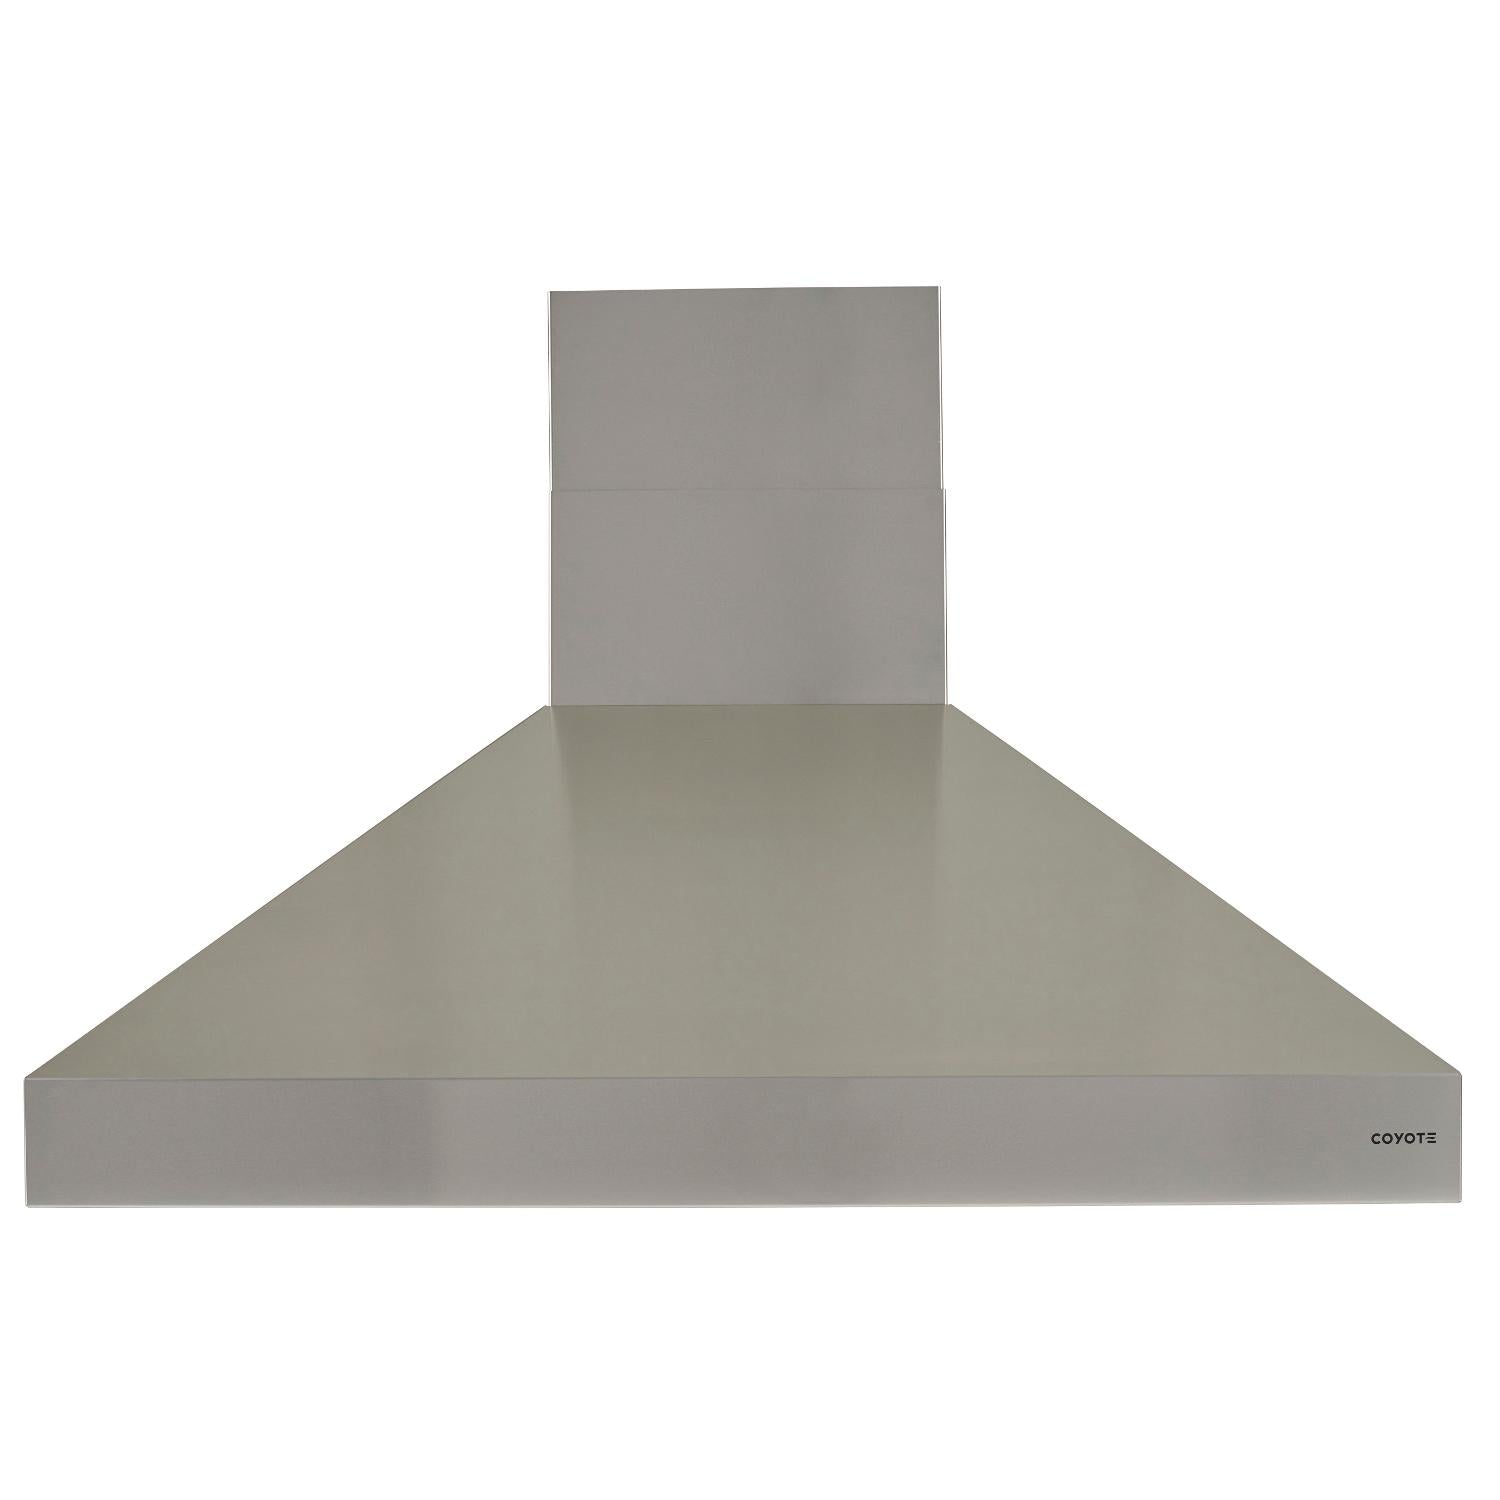 Coyote 8 to 9 Foot Ceiling Duct Cover for Coyote Outdoor 